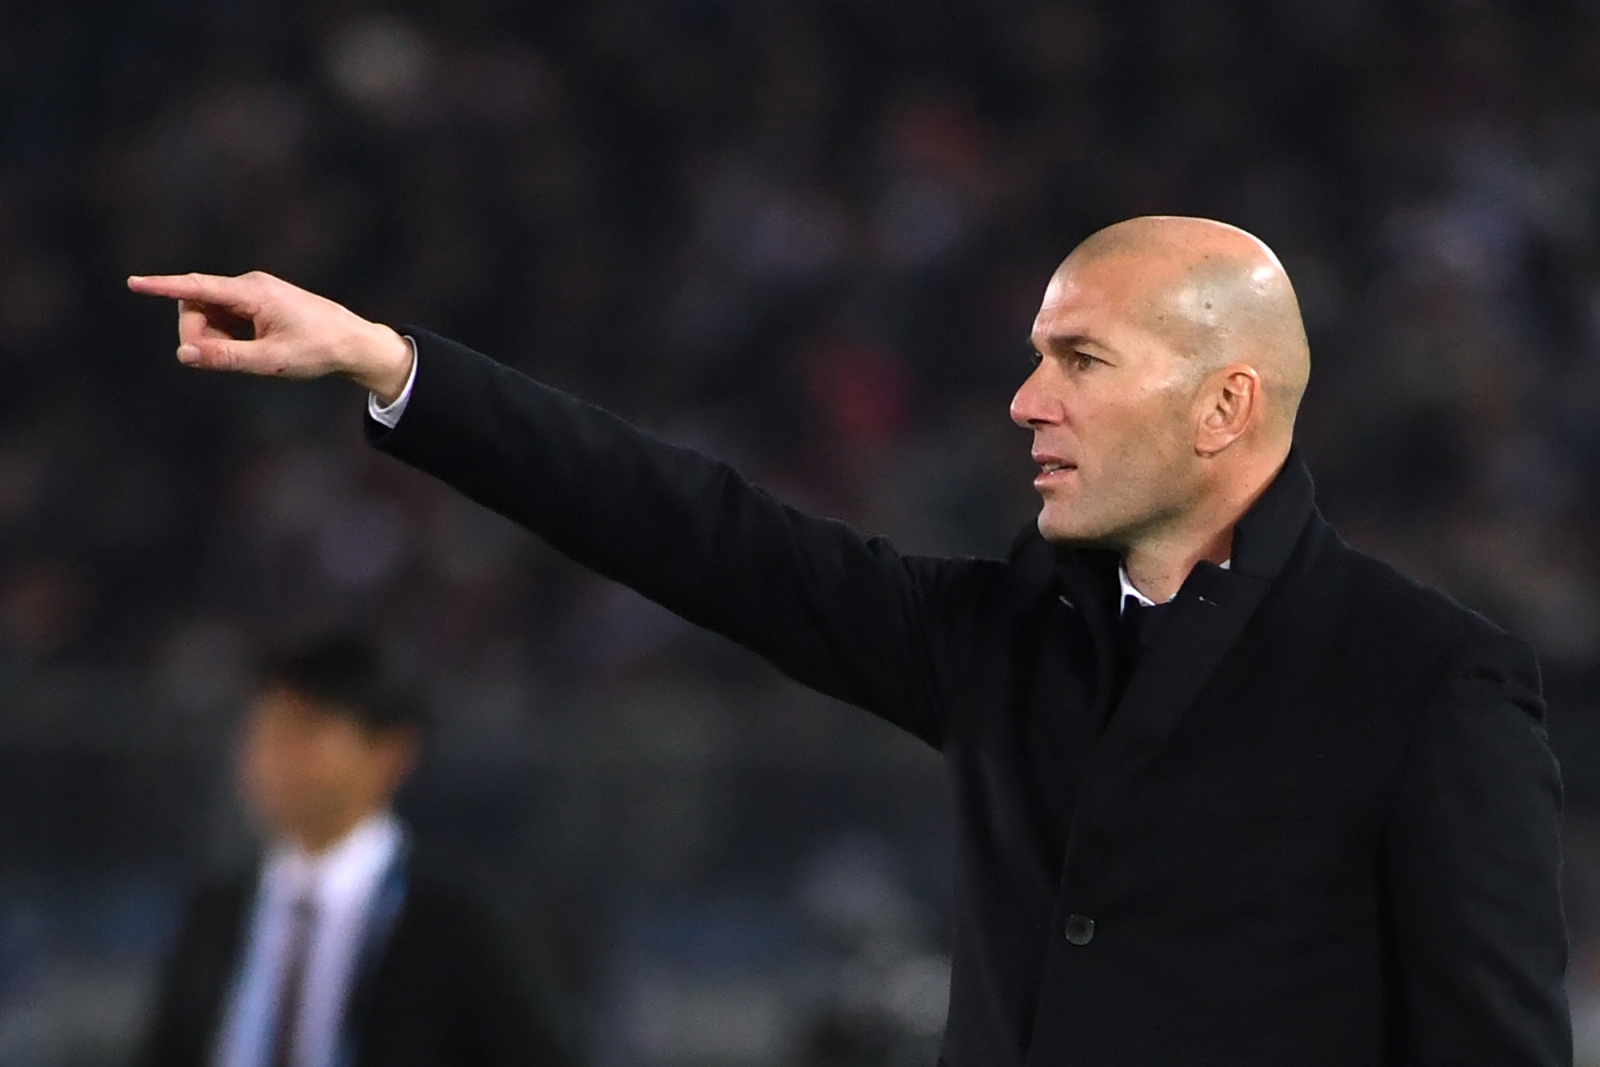 Zinedine Zidane questions his future at Real Madrid while welcoming Isco snub to Barcelona